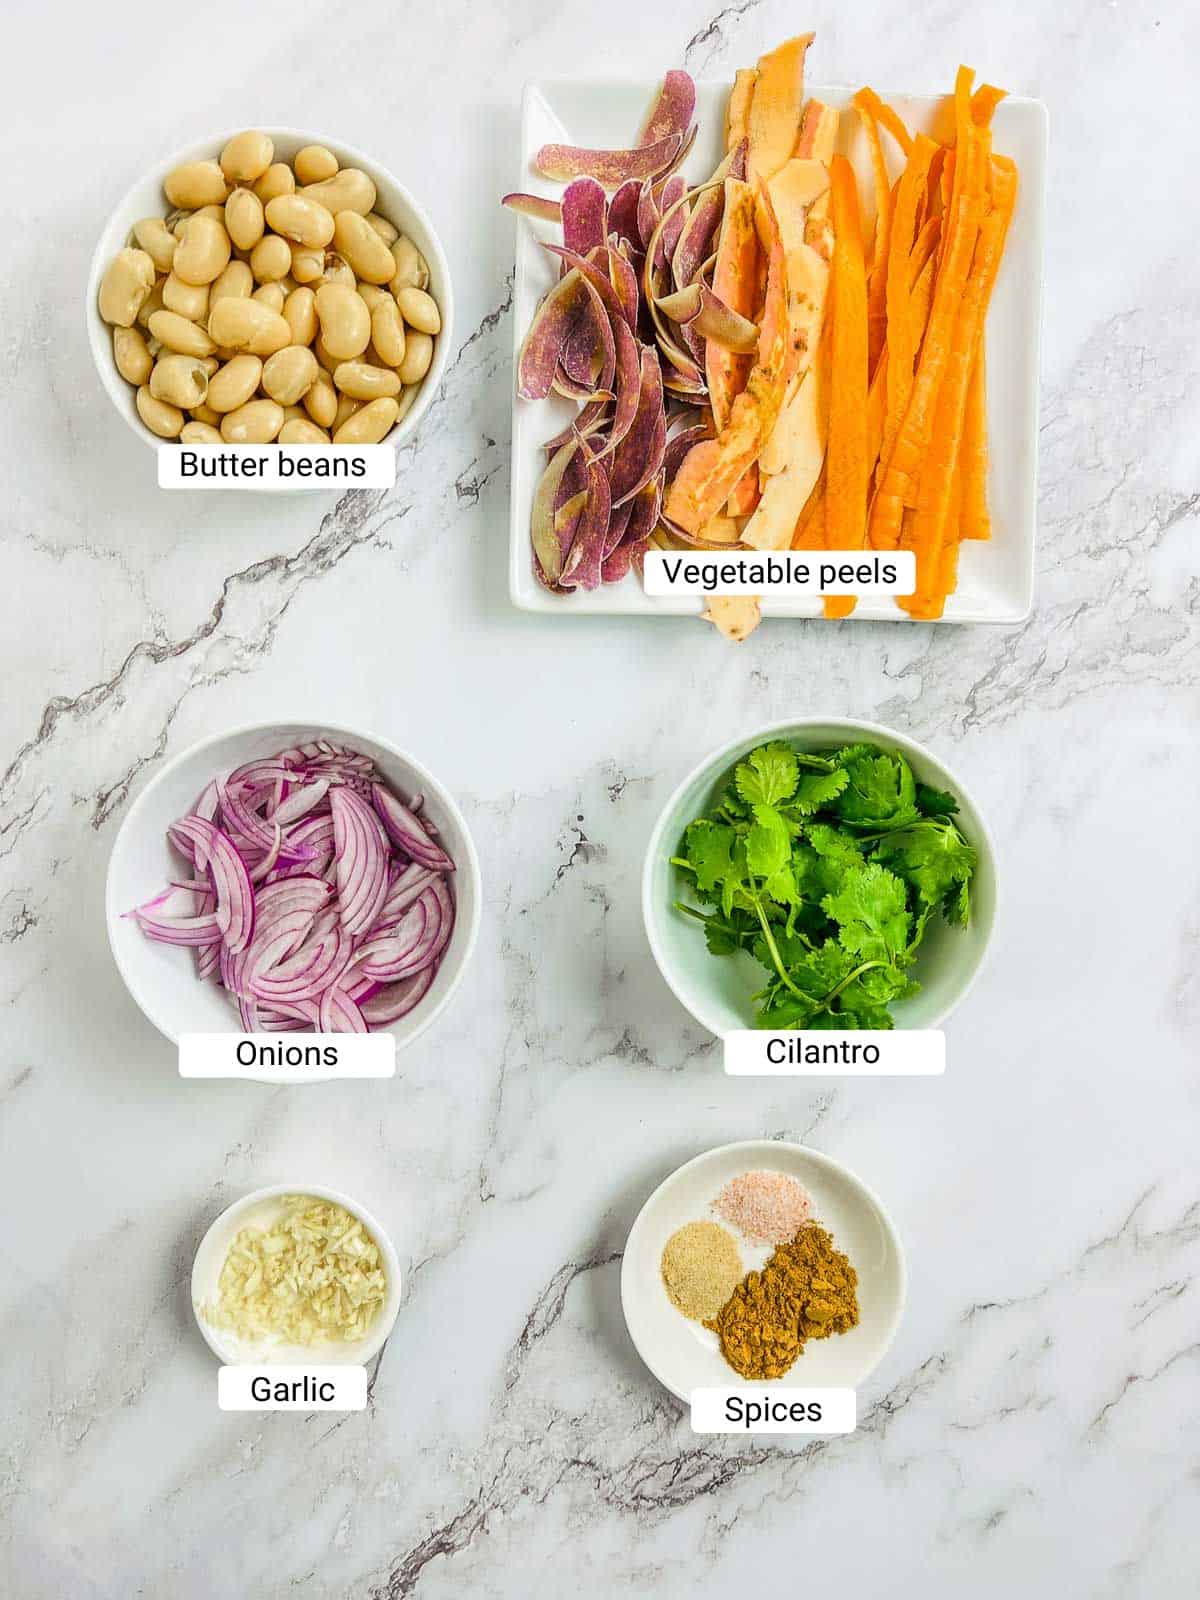 Ingredients to make vegetable peel dip and curried bean chips on a marble surface.